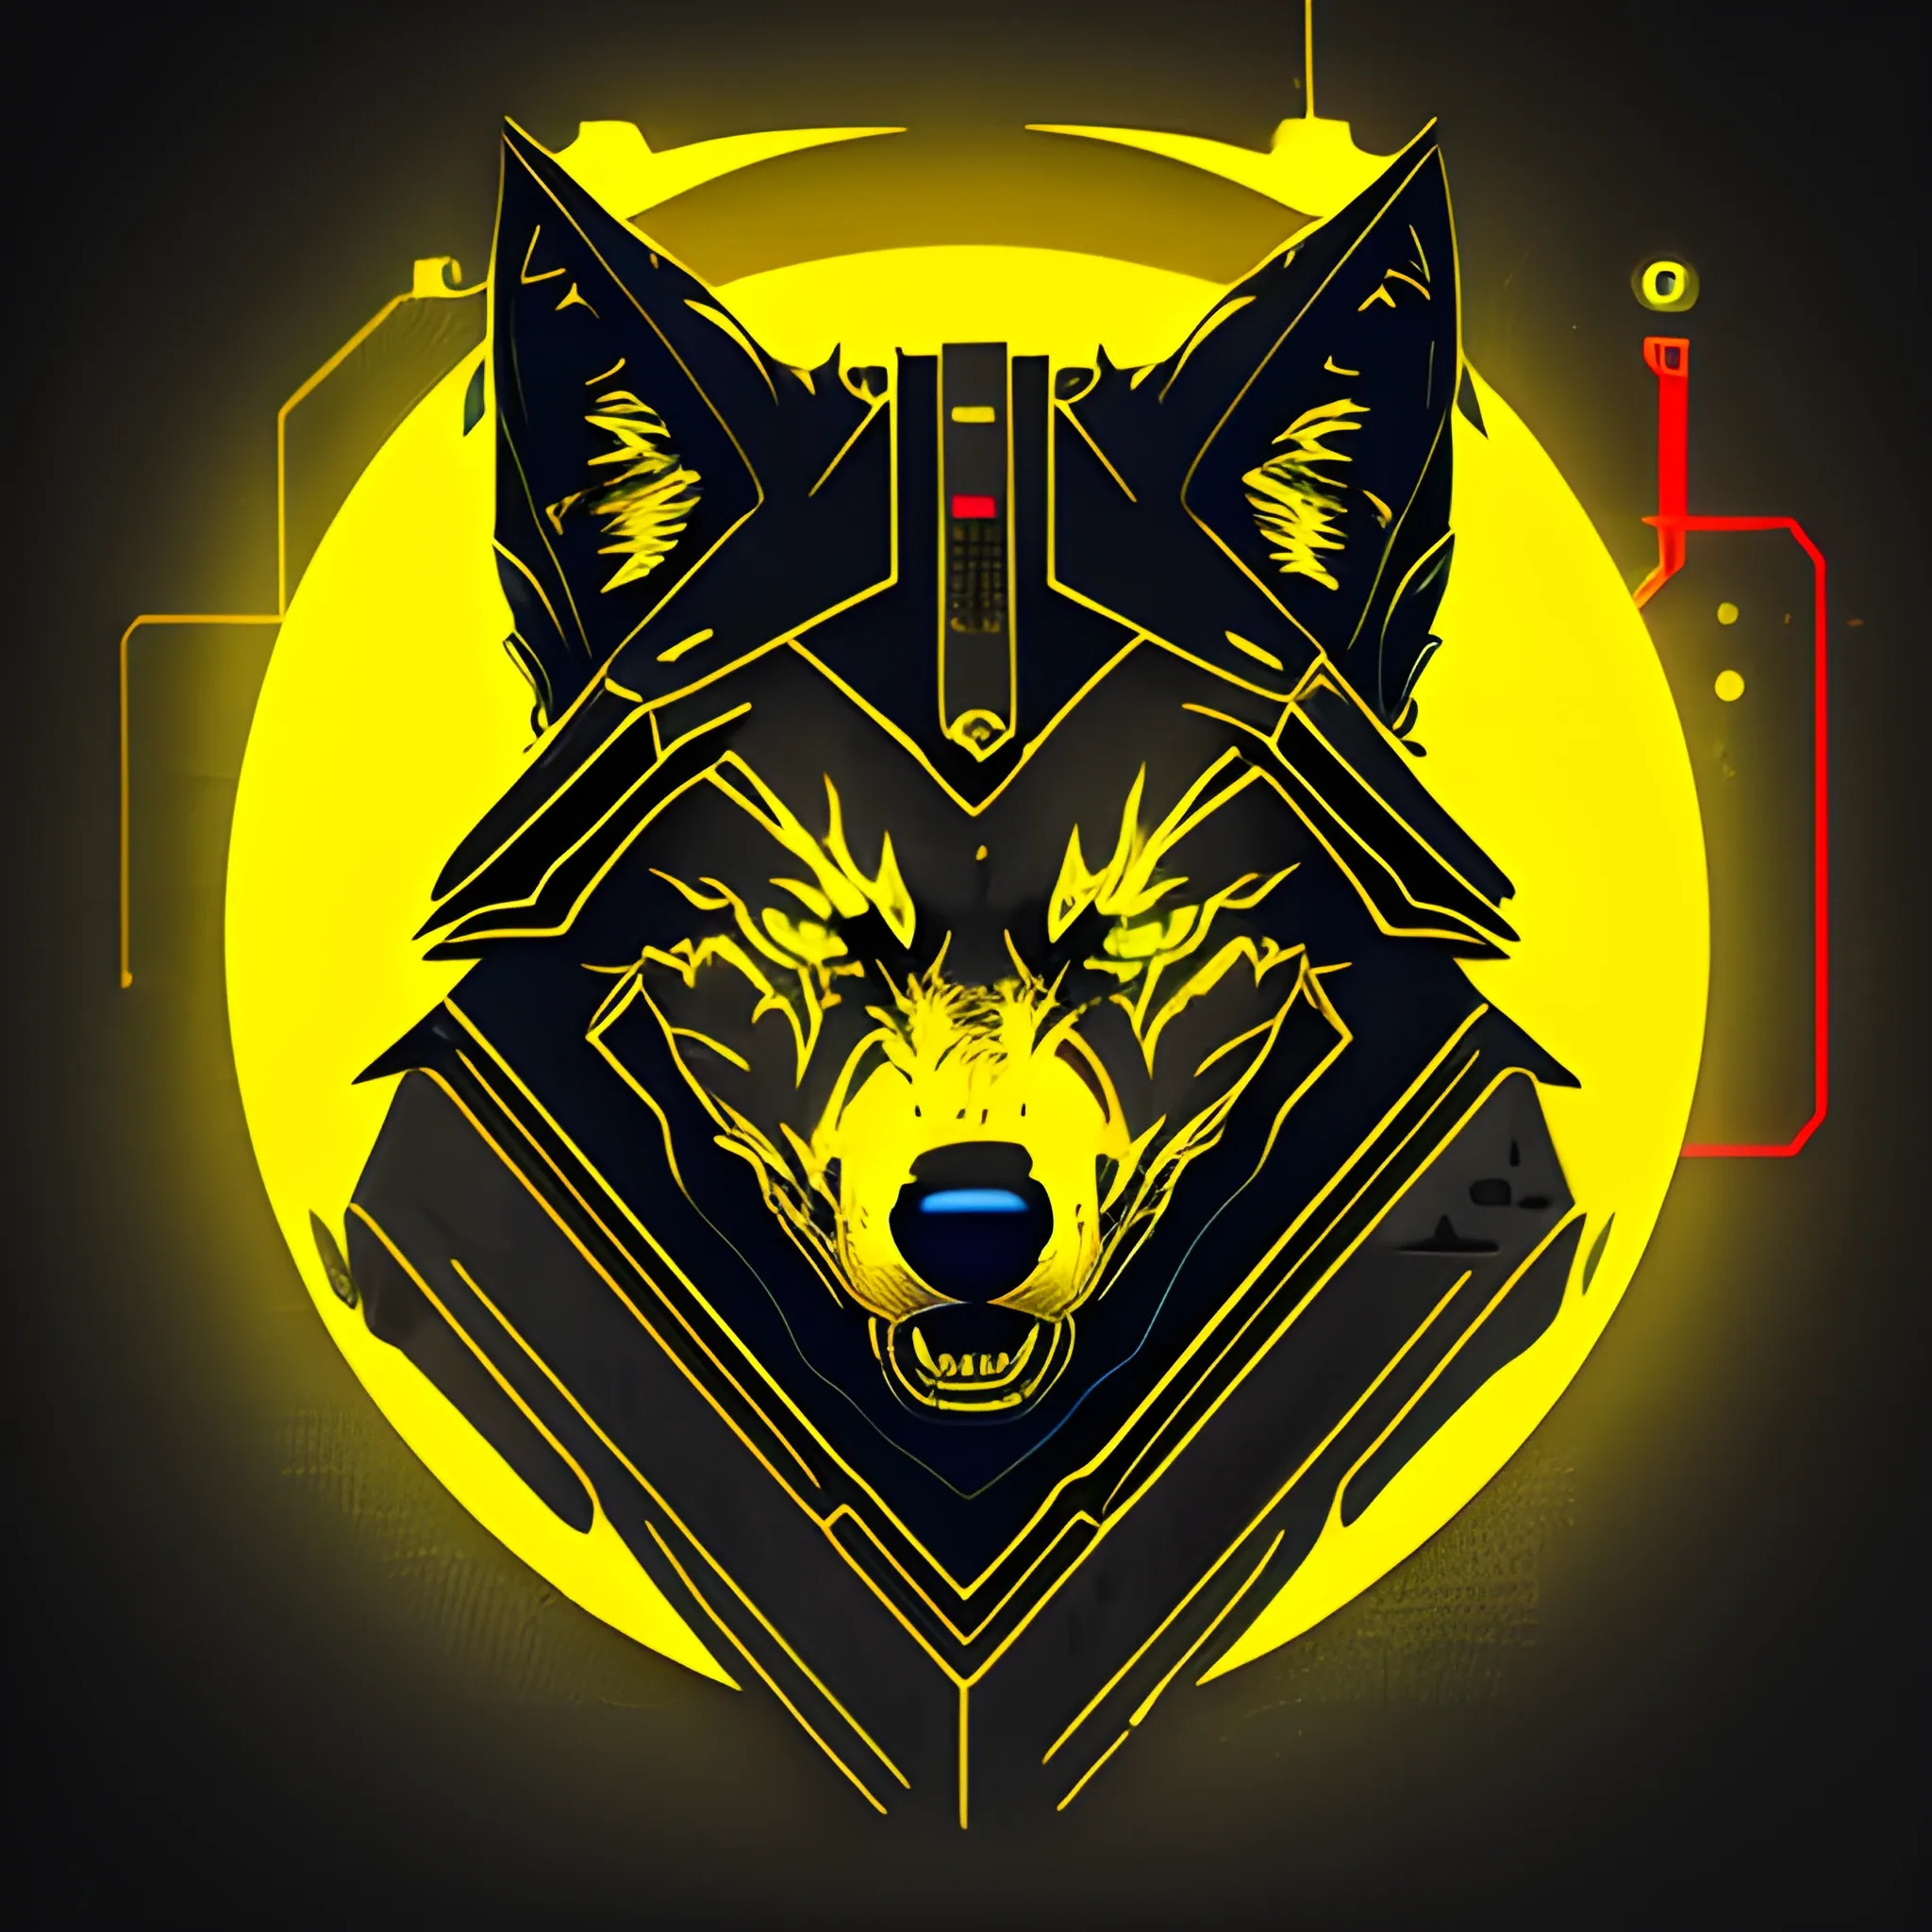 An angry cyberpunk wolf logo, using the golden yellow color